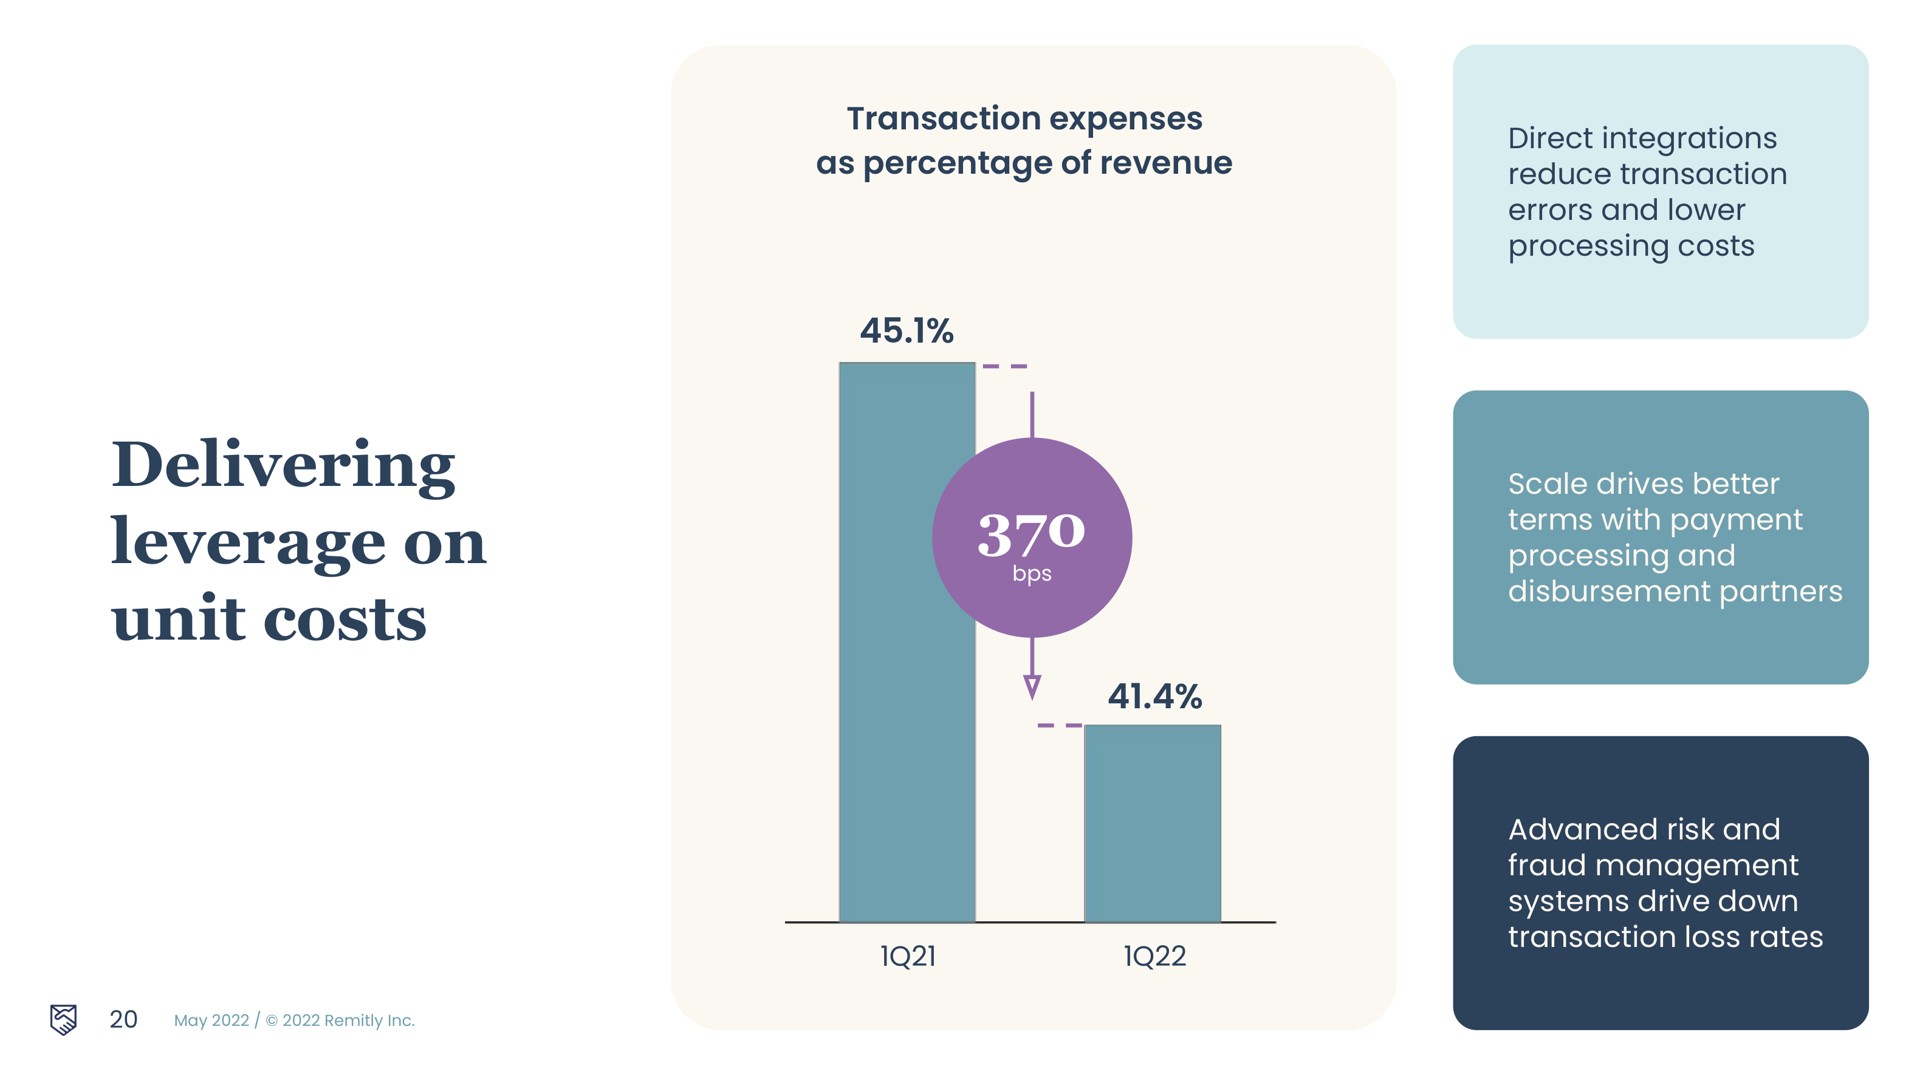 transaction expenses as percentage of revenue delivering leverage on unit costs direct integrations reduce transaction errors and lower processing costs scale drives better terms with payment processing and disbursement partners advanced risk and fraud management systems drive down transaction loss rates | Remitly